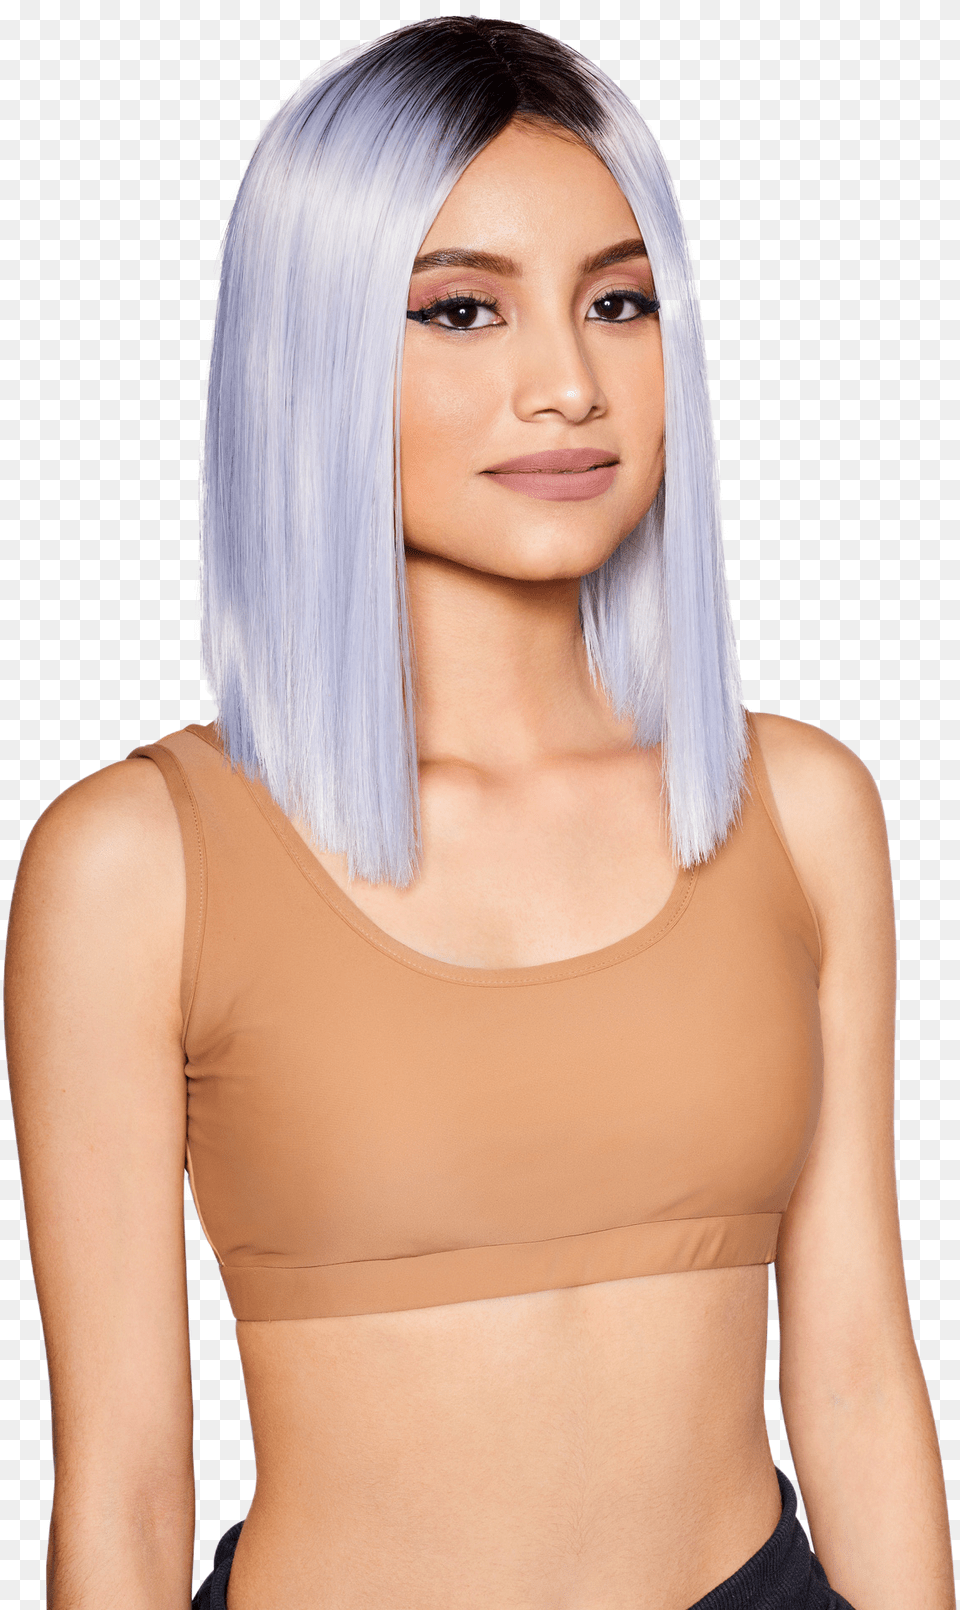 Shop Cool U0026 Trendy Womens Wigs Ponytail Inh Hair Midriff, Adult, Person, Woman, Female Free Png Download